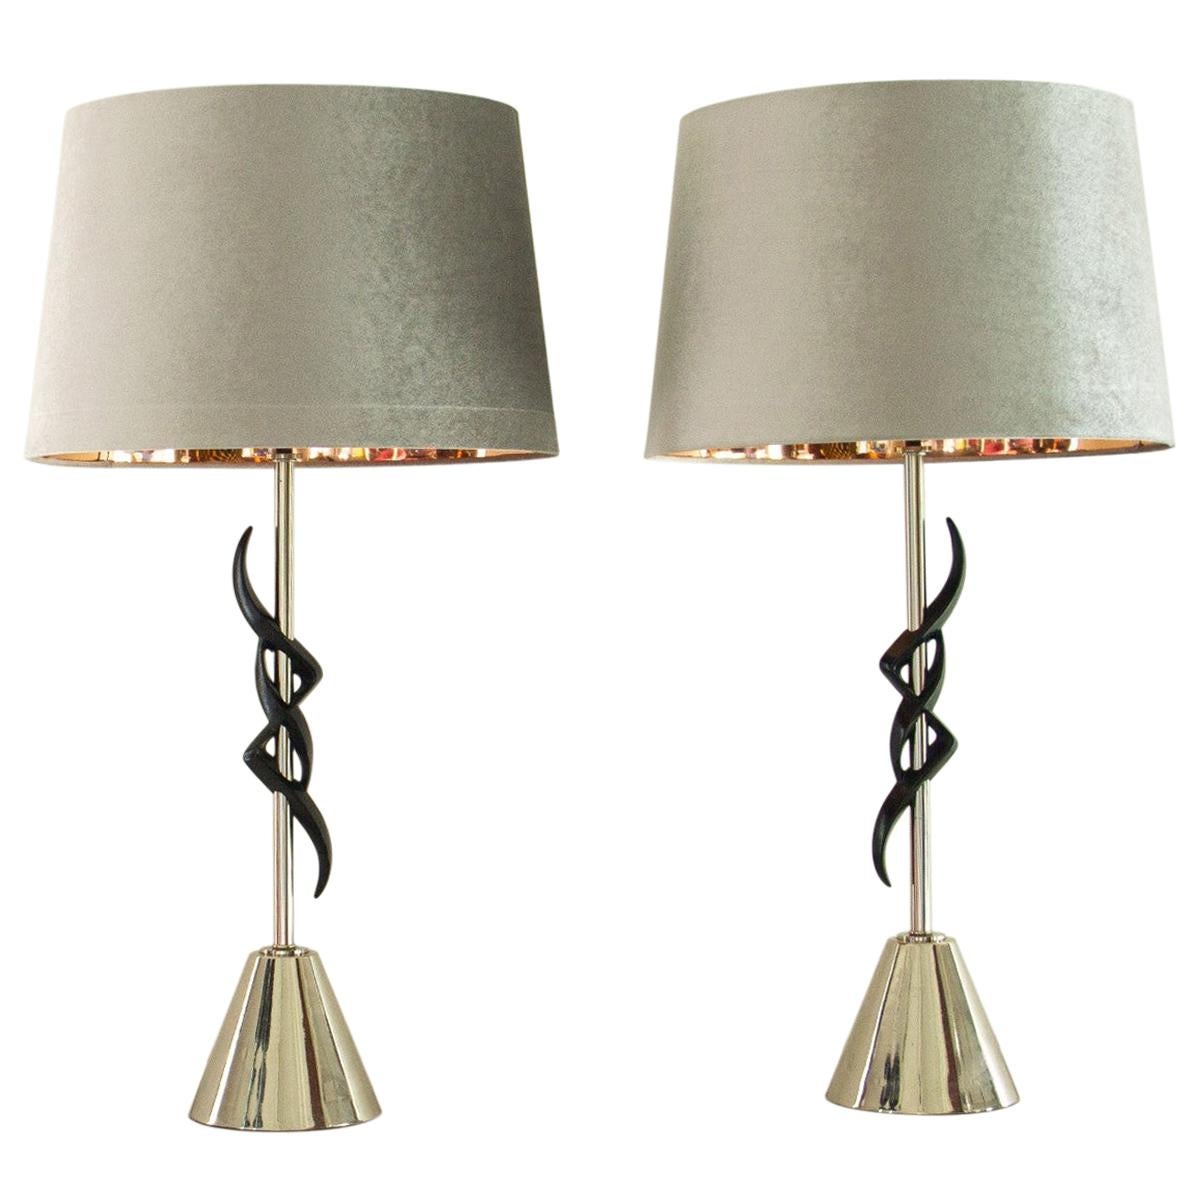 Pair of Rembrandt Designed Lamps, 1950s